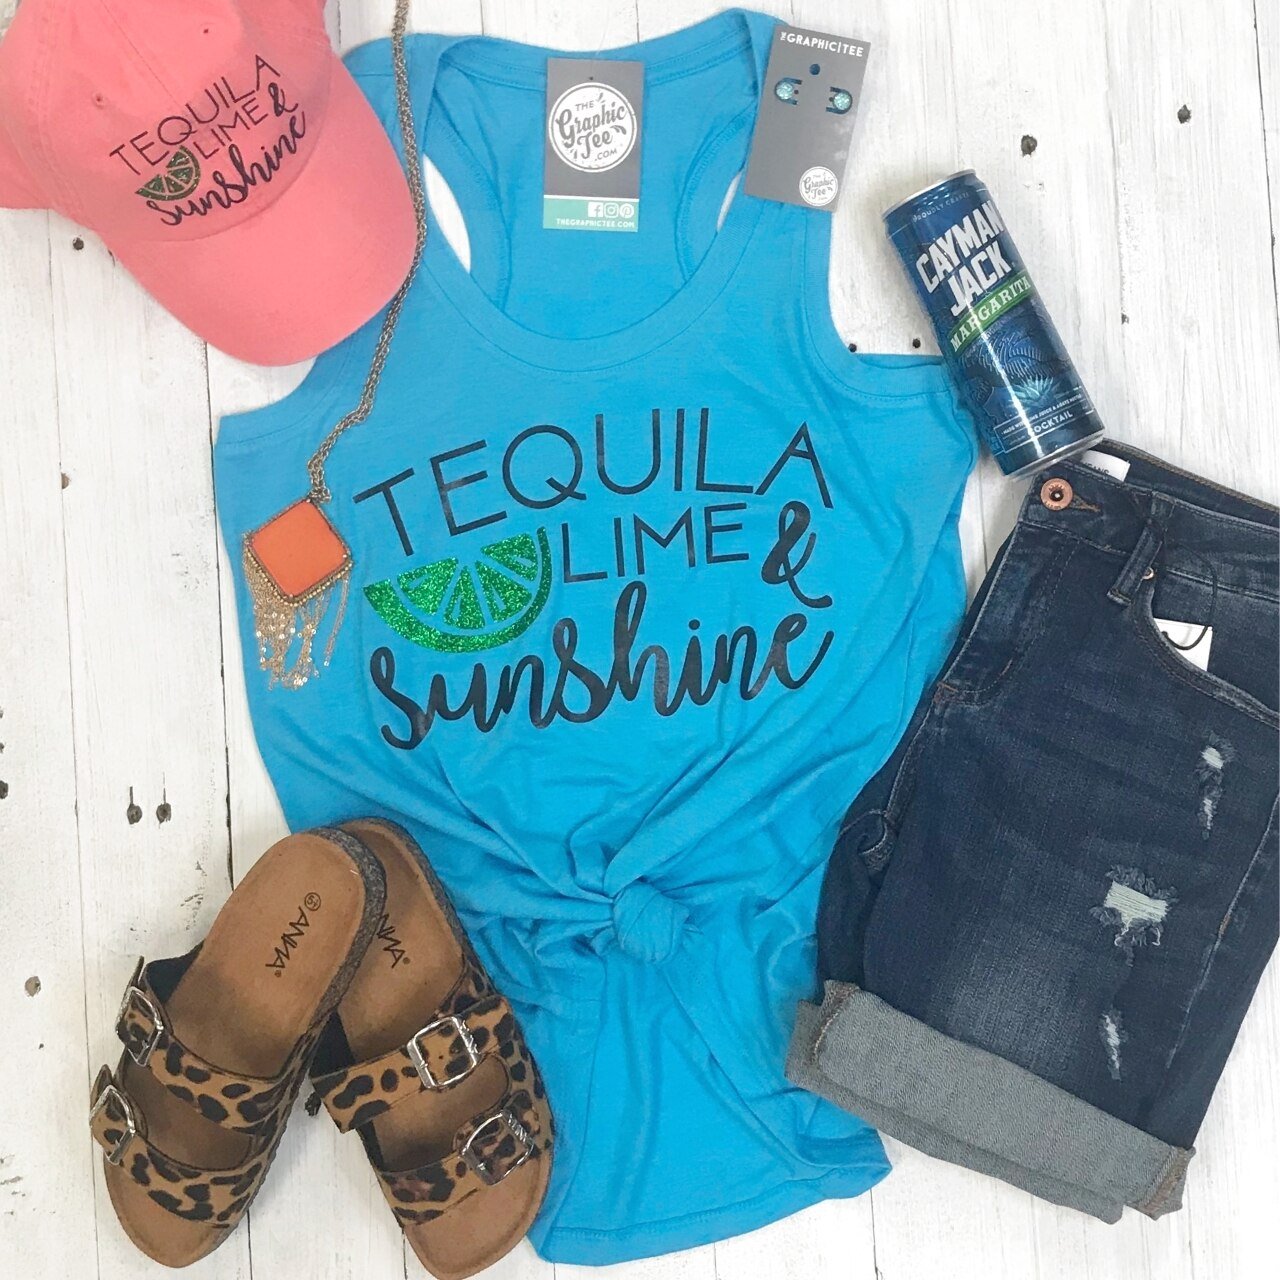 Tequila, Lime & Sunshine - Ladies Tank - The Graphic Tee